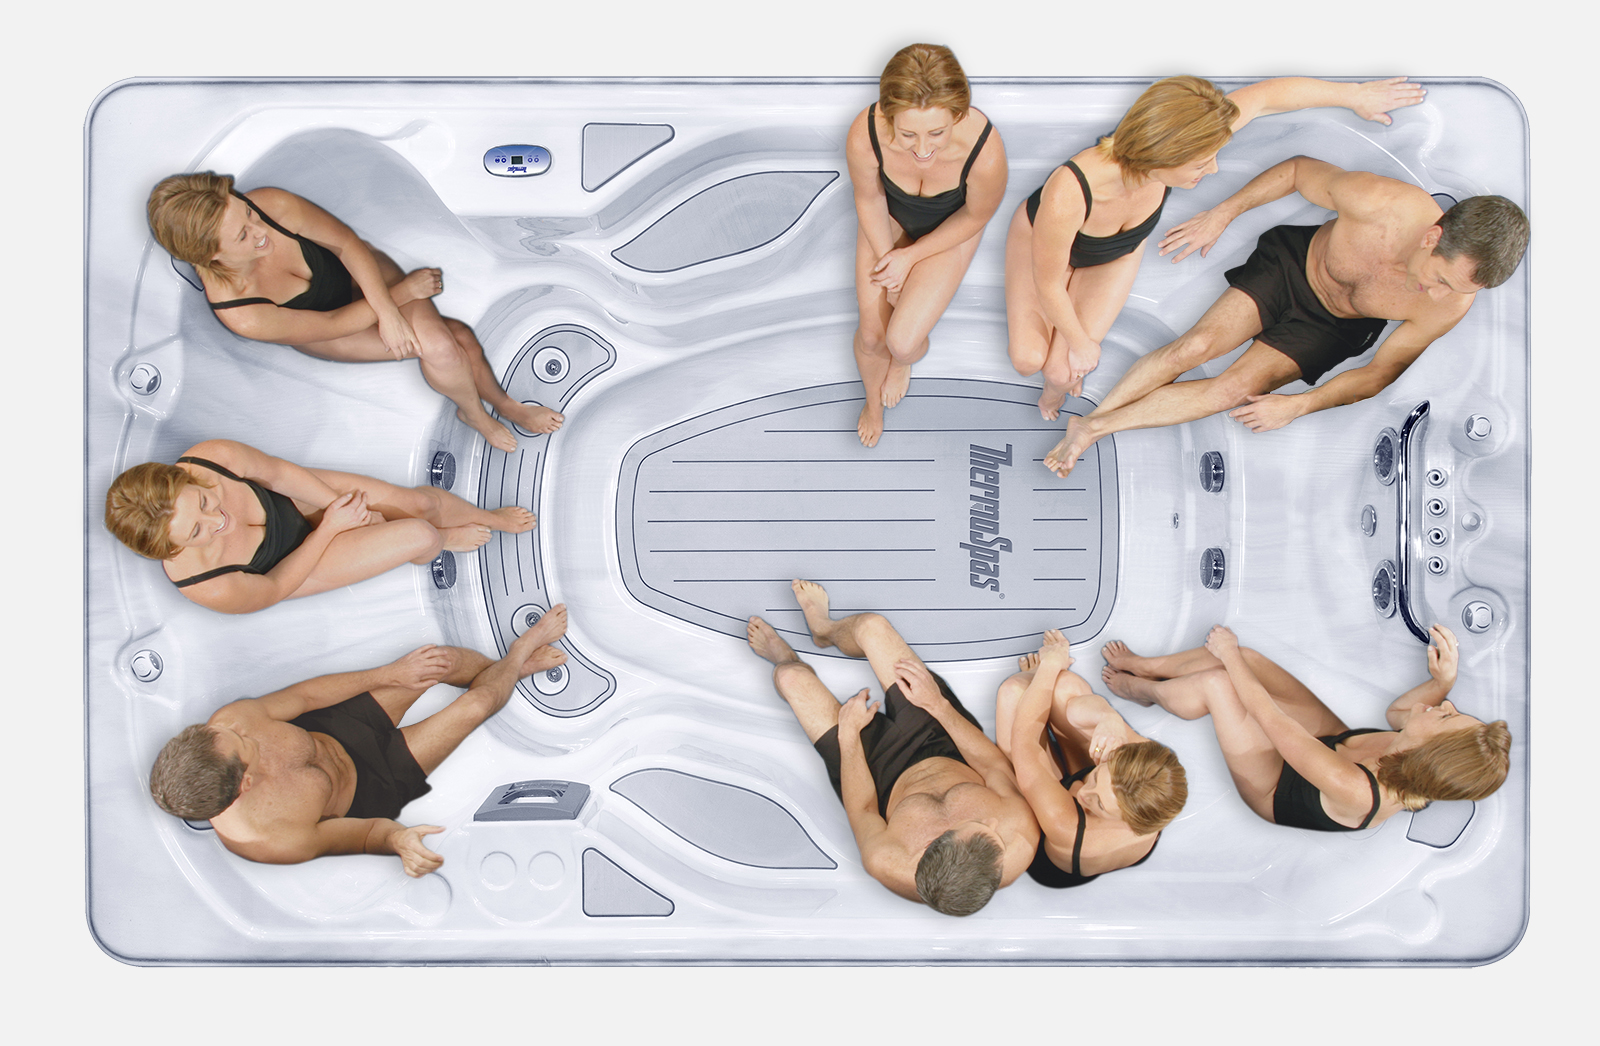 9 Seater Spa